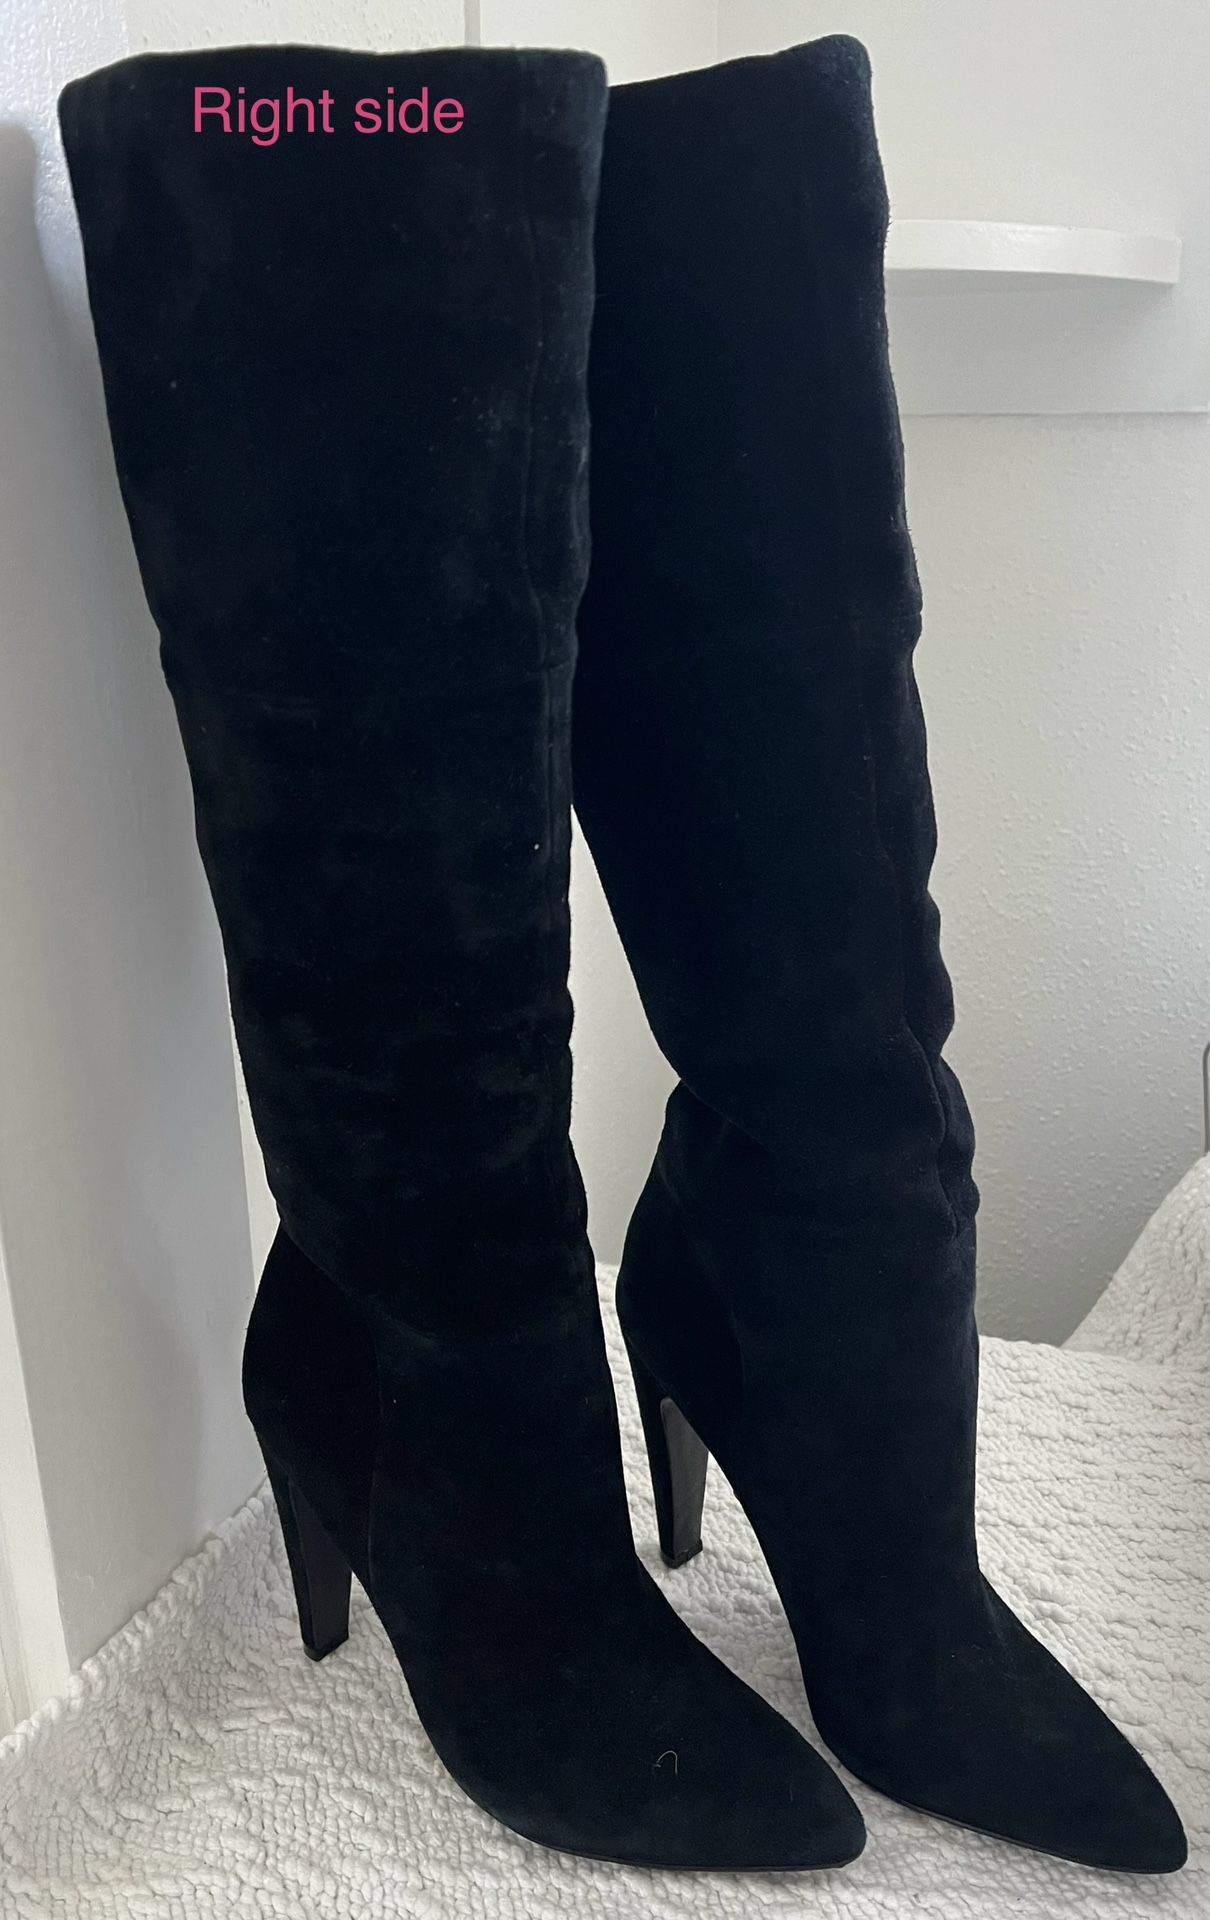 New Steve Madden Woman’s Boot | Carrie | Black Sued | Size 8